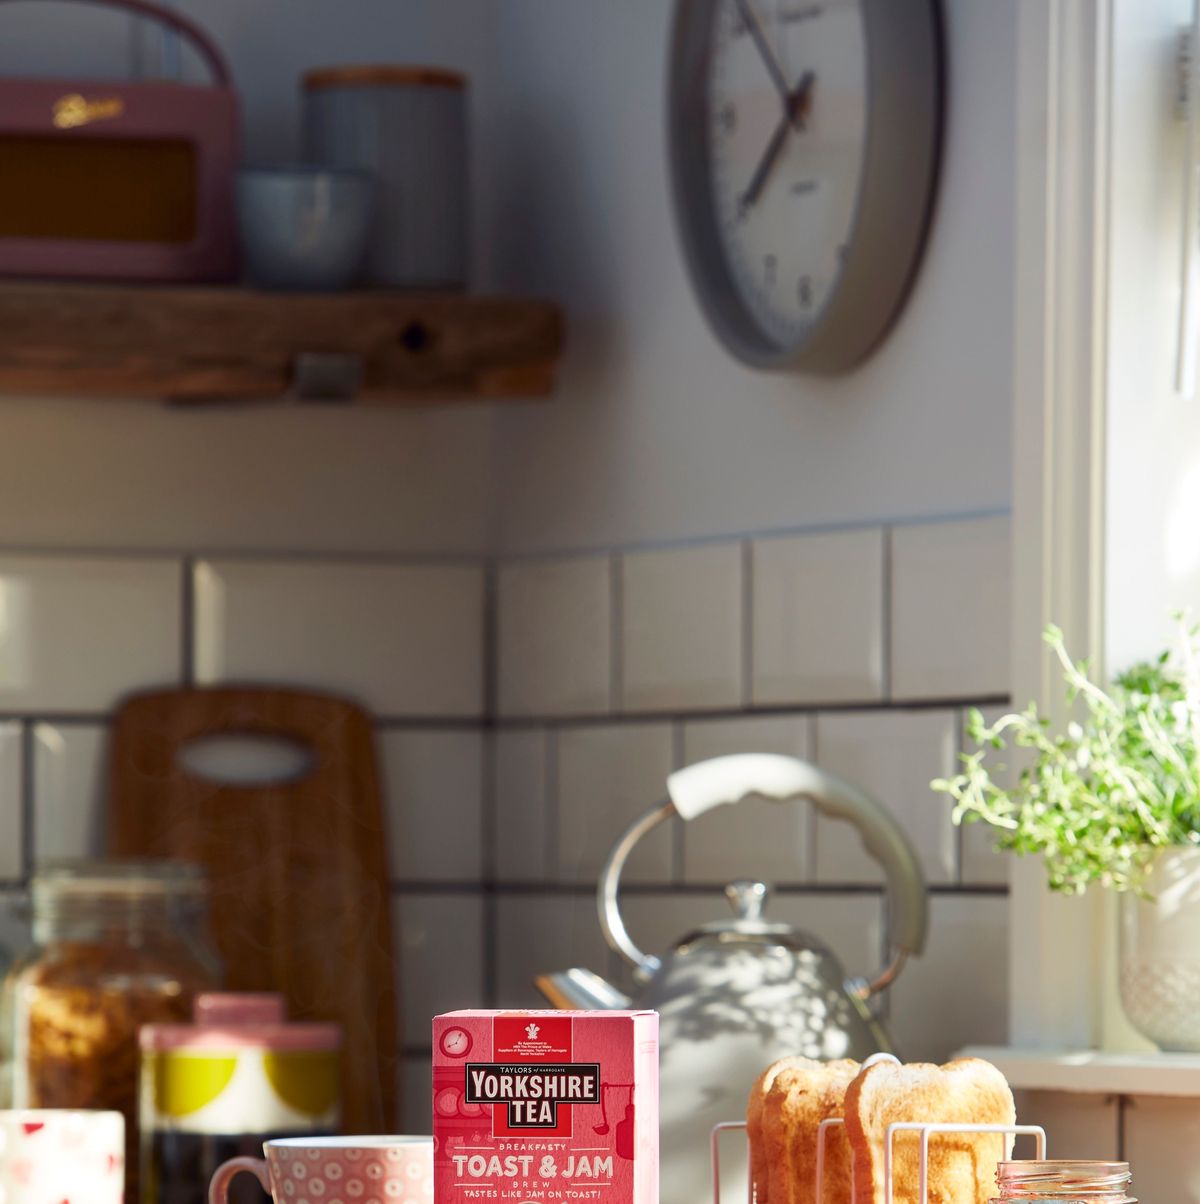 A tea-lover's review of Yorkshire Tea's 'toast and jam' tea